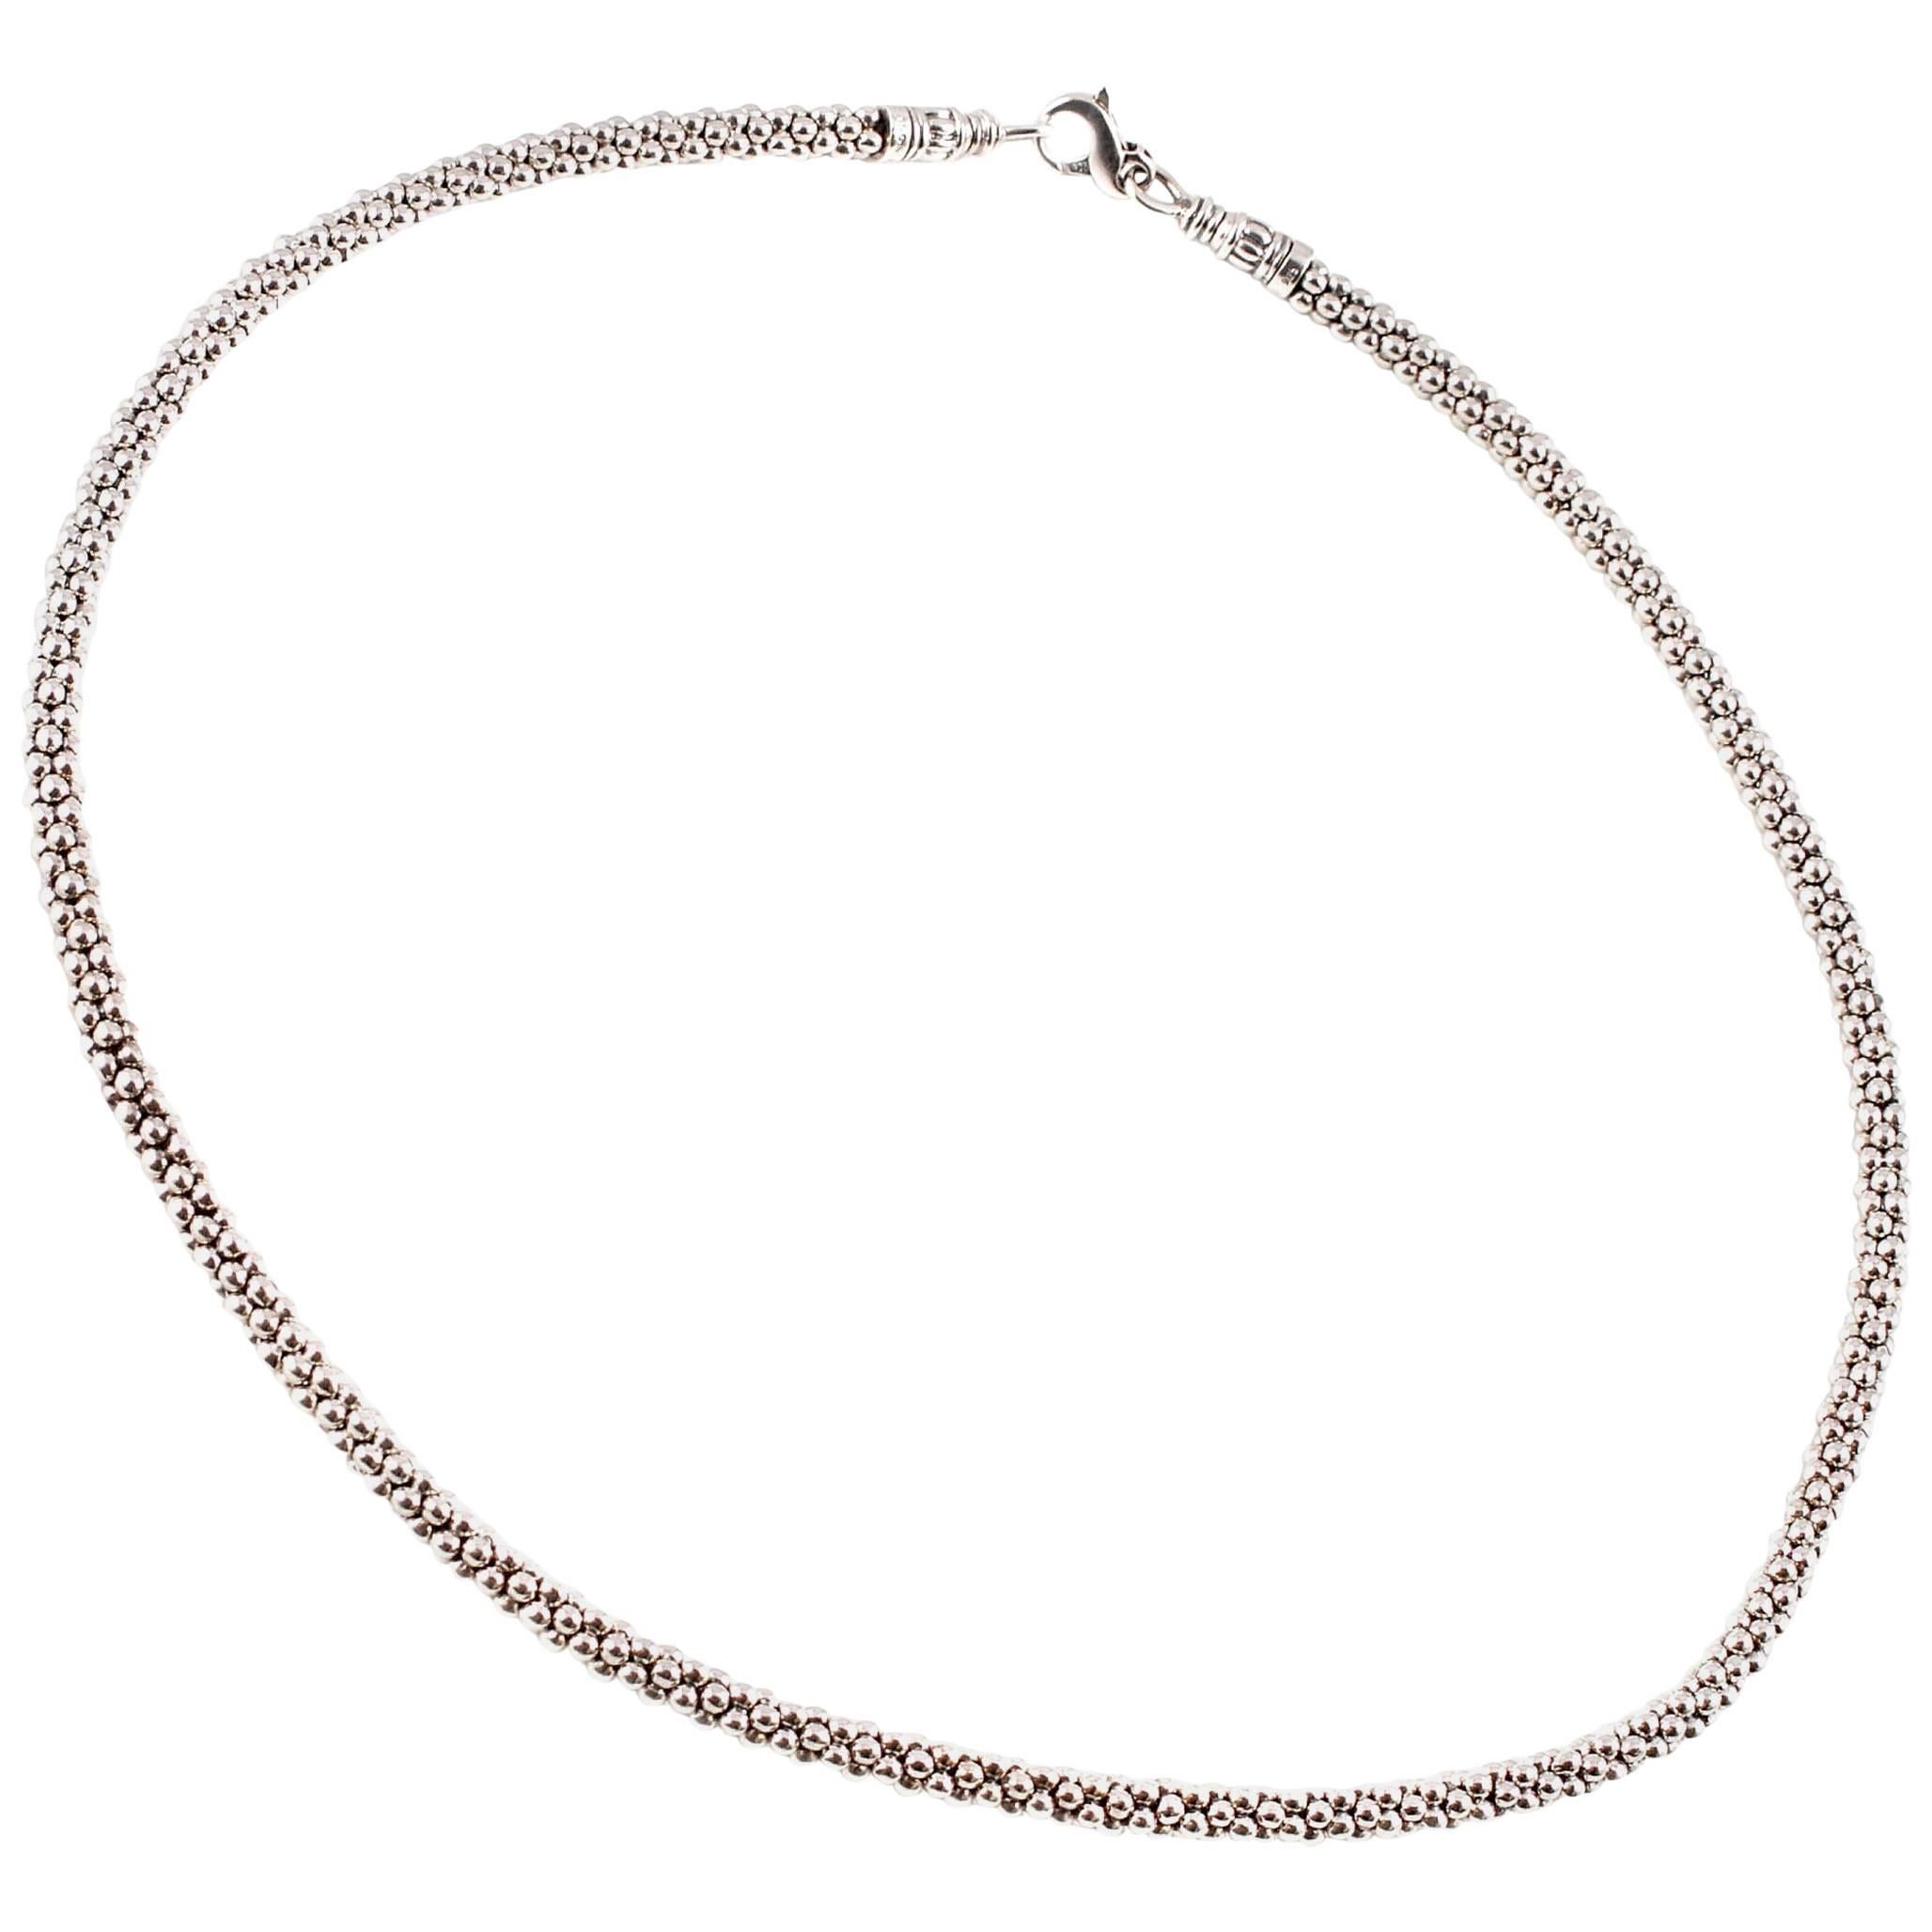 "Caviar" by "Lagos" Sterling Silver Necklace